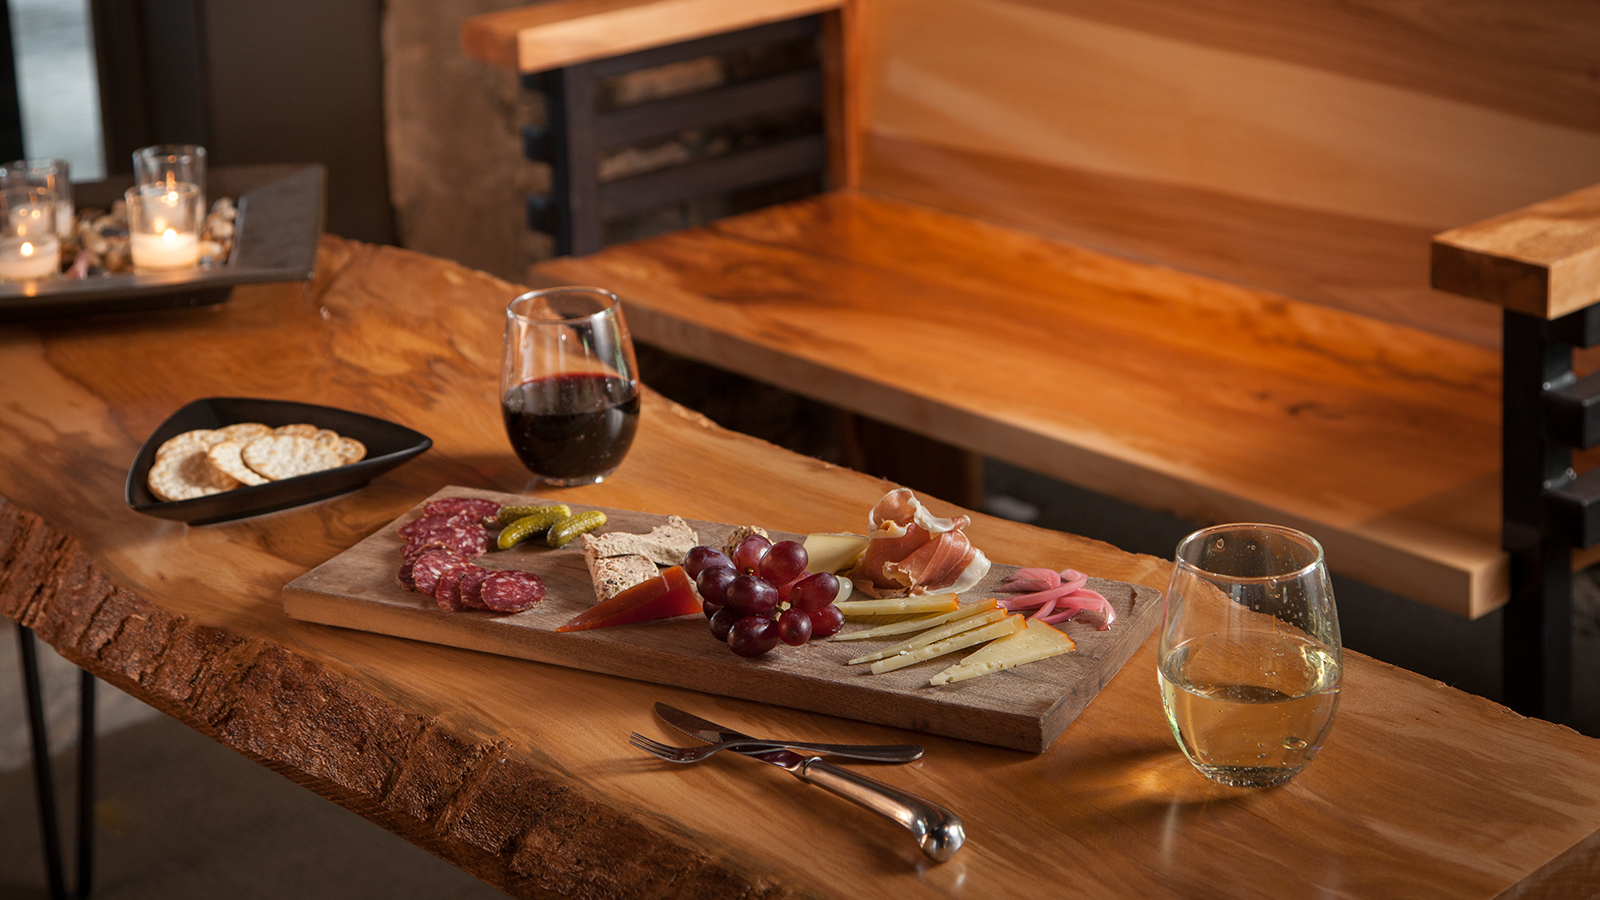 Taste local wine and small plates at Glass-wine.bar.kitchen.